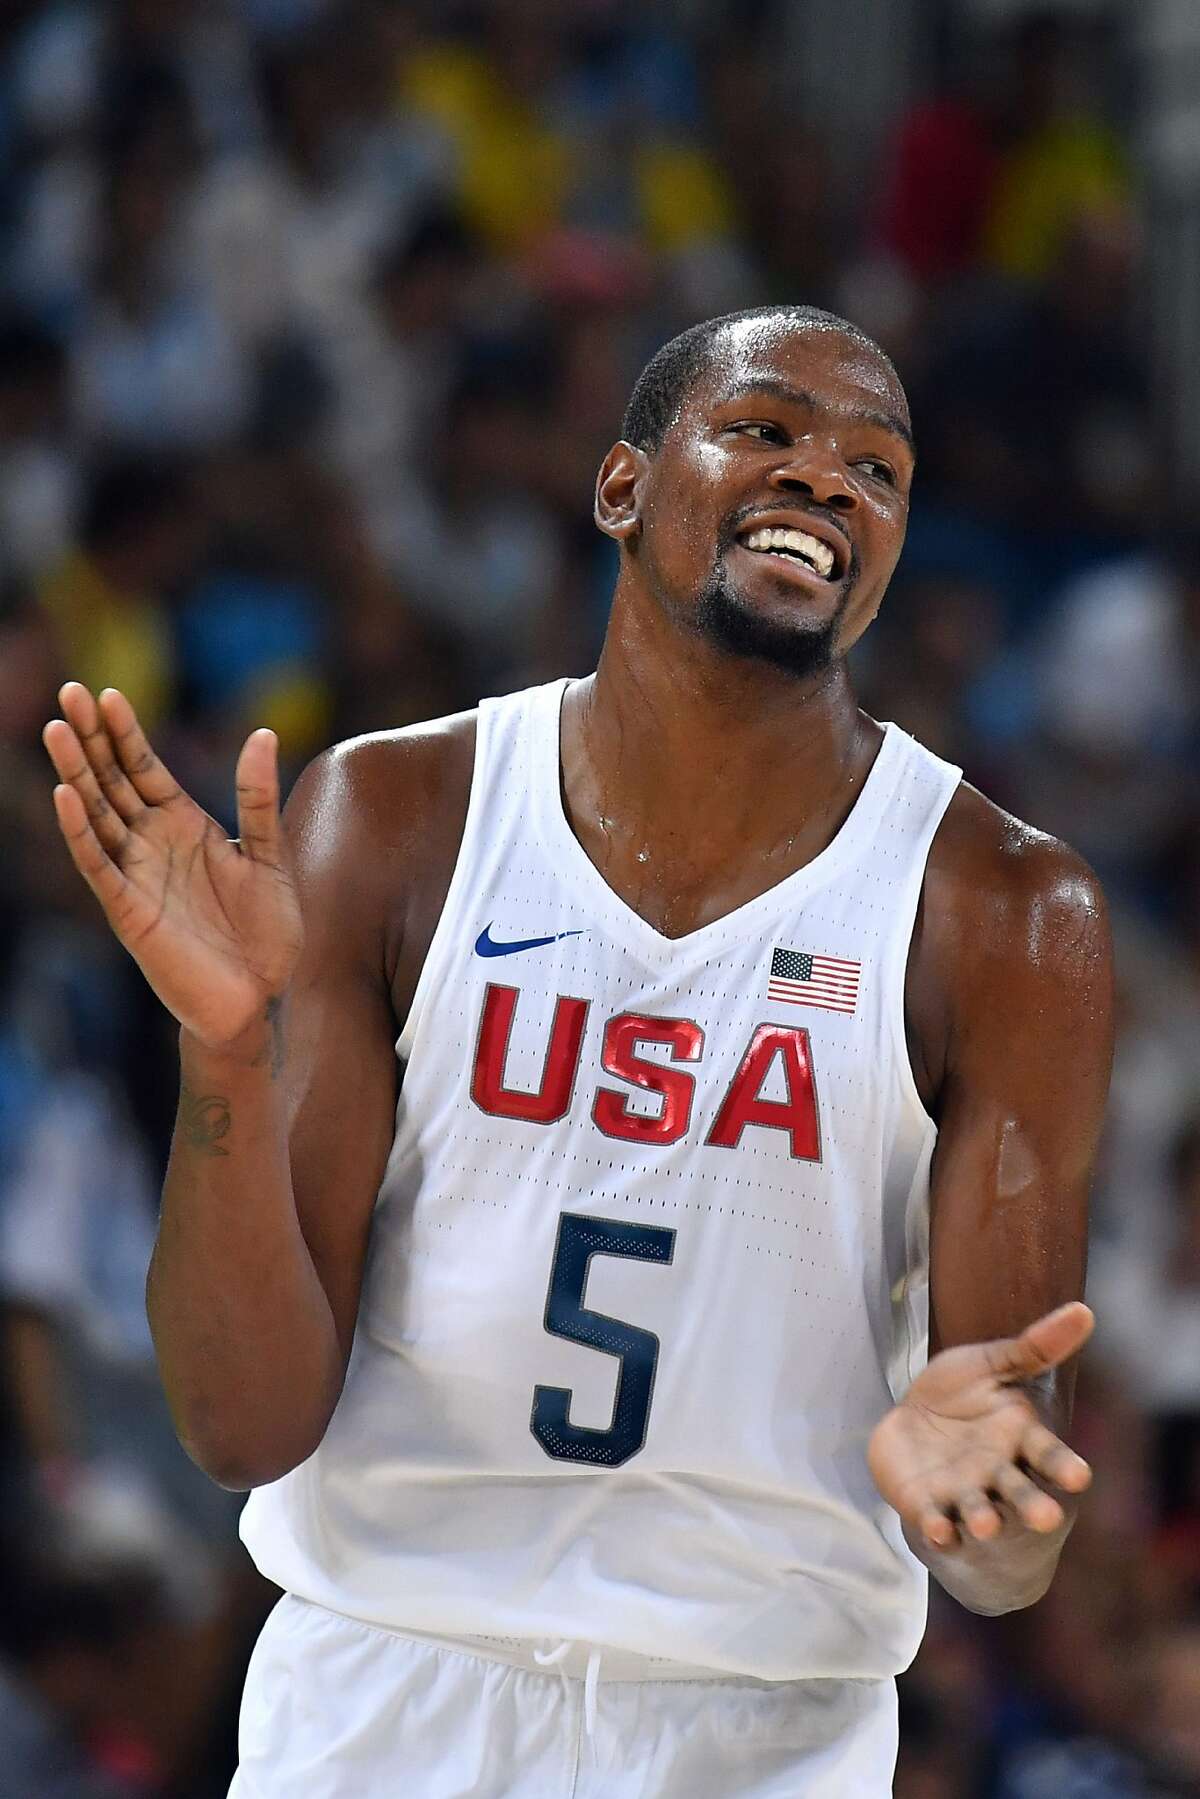 USA's guard Kevin Durant reacts during a Men's quarterfinal basketball match between USA and Argentina at the Carioca Arena 1 in Rio de Janeiro on August 17, 2016 during the Rio 2016 Olympic Games. / AFP PHOTO / Andrej ISAKOVICANDREJ ISAKOVIC/AFP/Getty Images